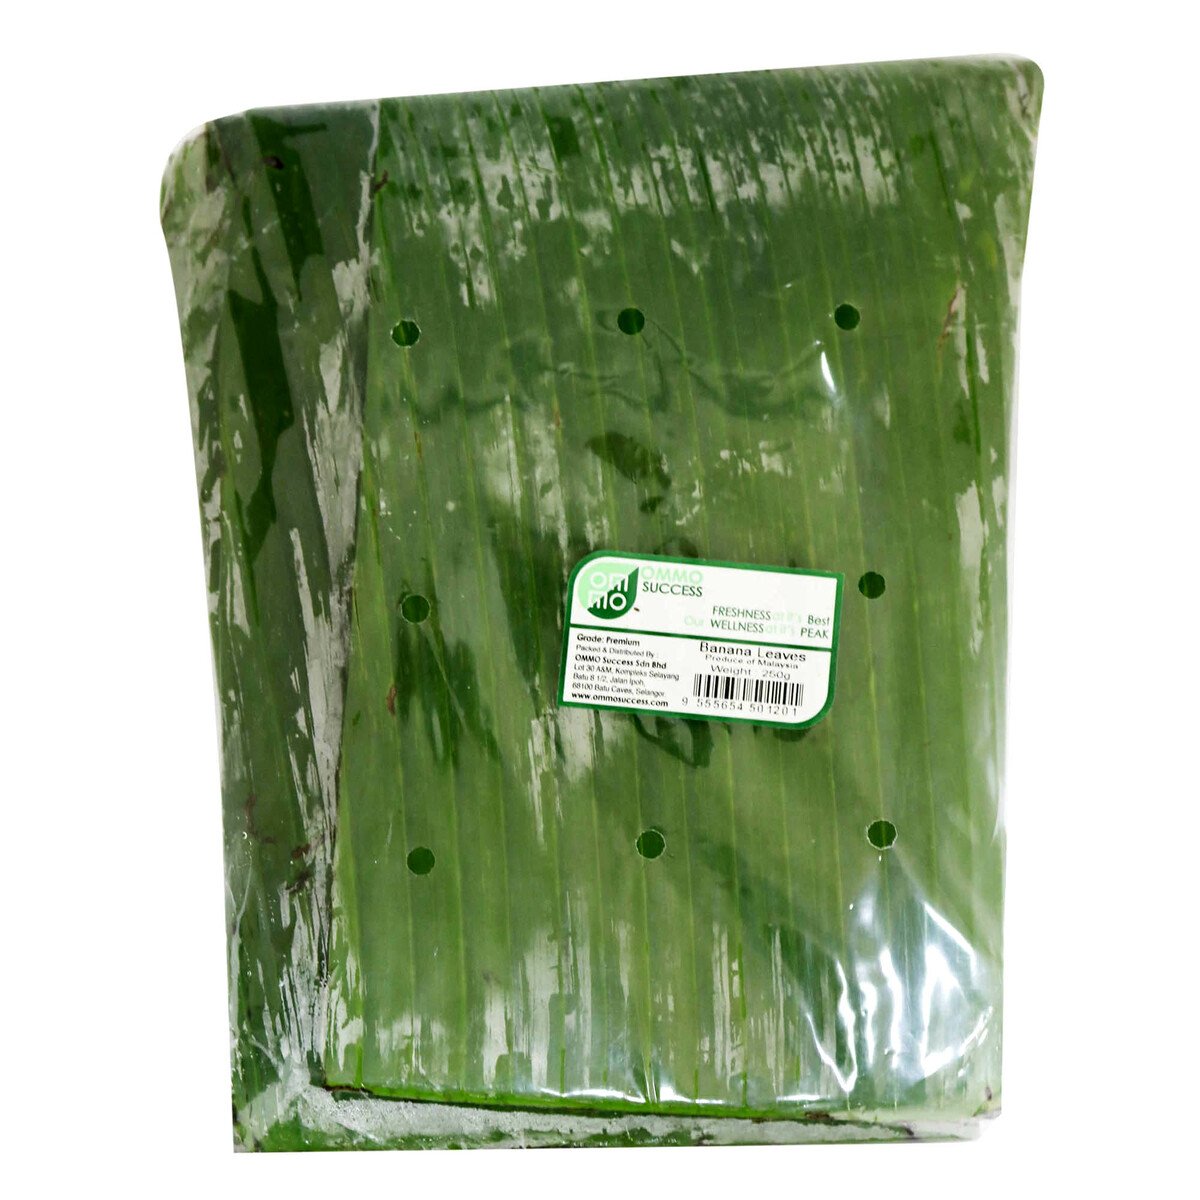 Banana Leaves 250g Approx. Weight